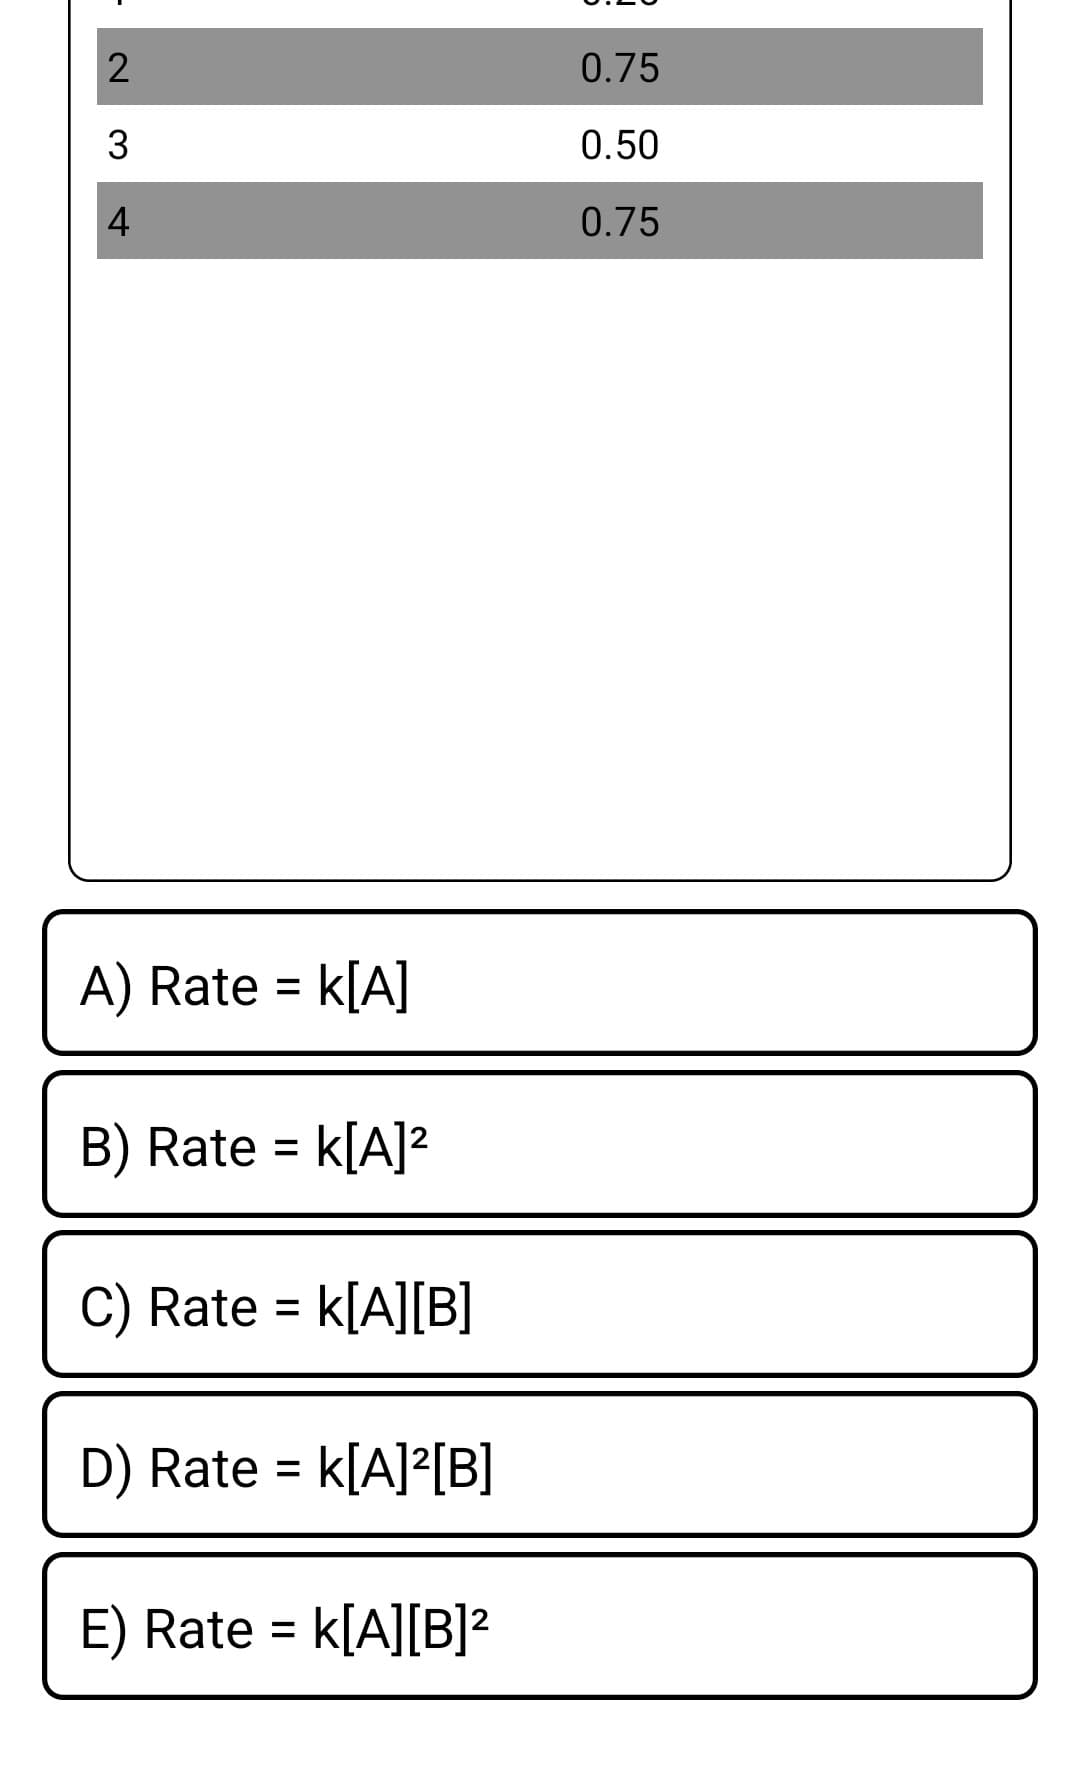 0.75
0.50
0.75
A) Rate = k[A]
B) Rate = k[A]?
C) Rate =
K[A][B]
D) Rate = k[A]?[B]
E) Rate = k[A][B]?
4.
